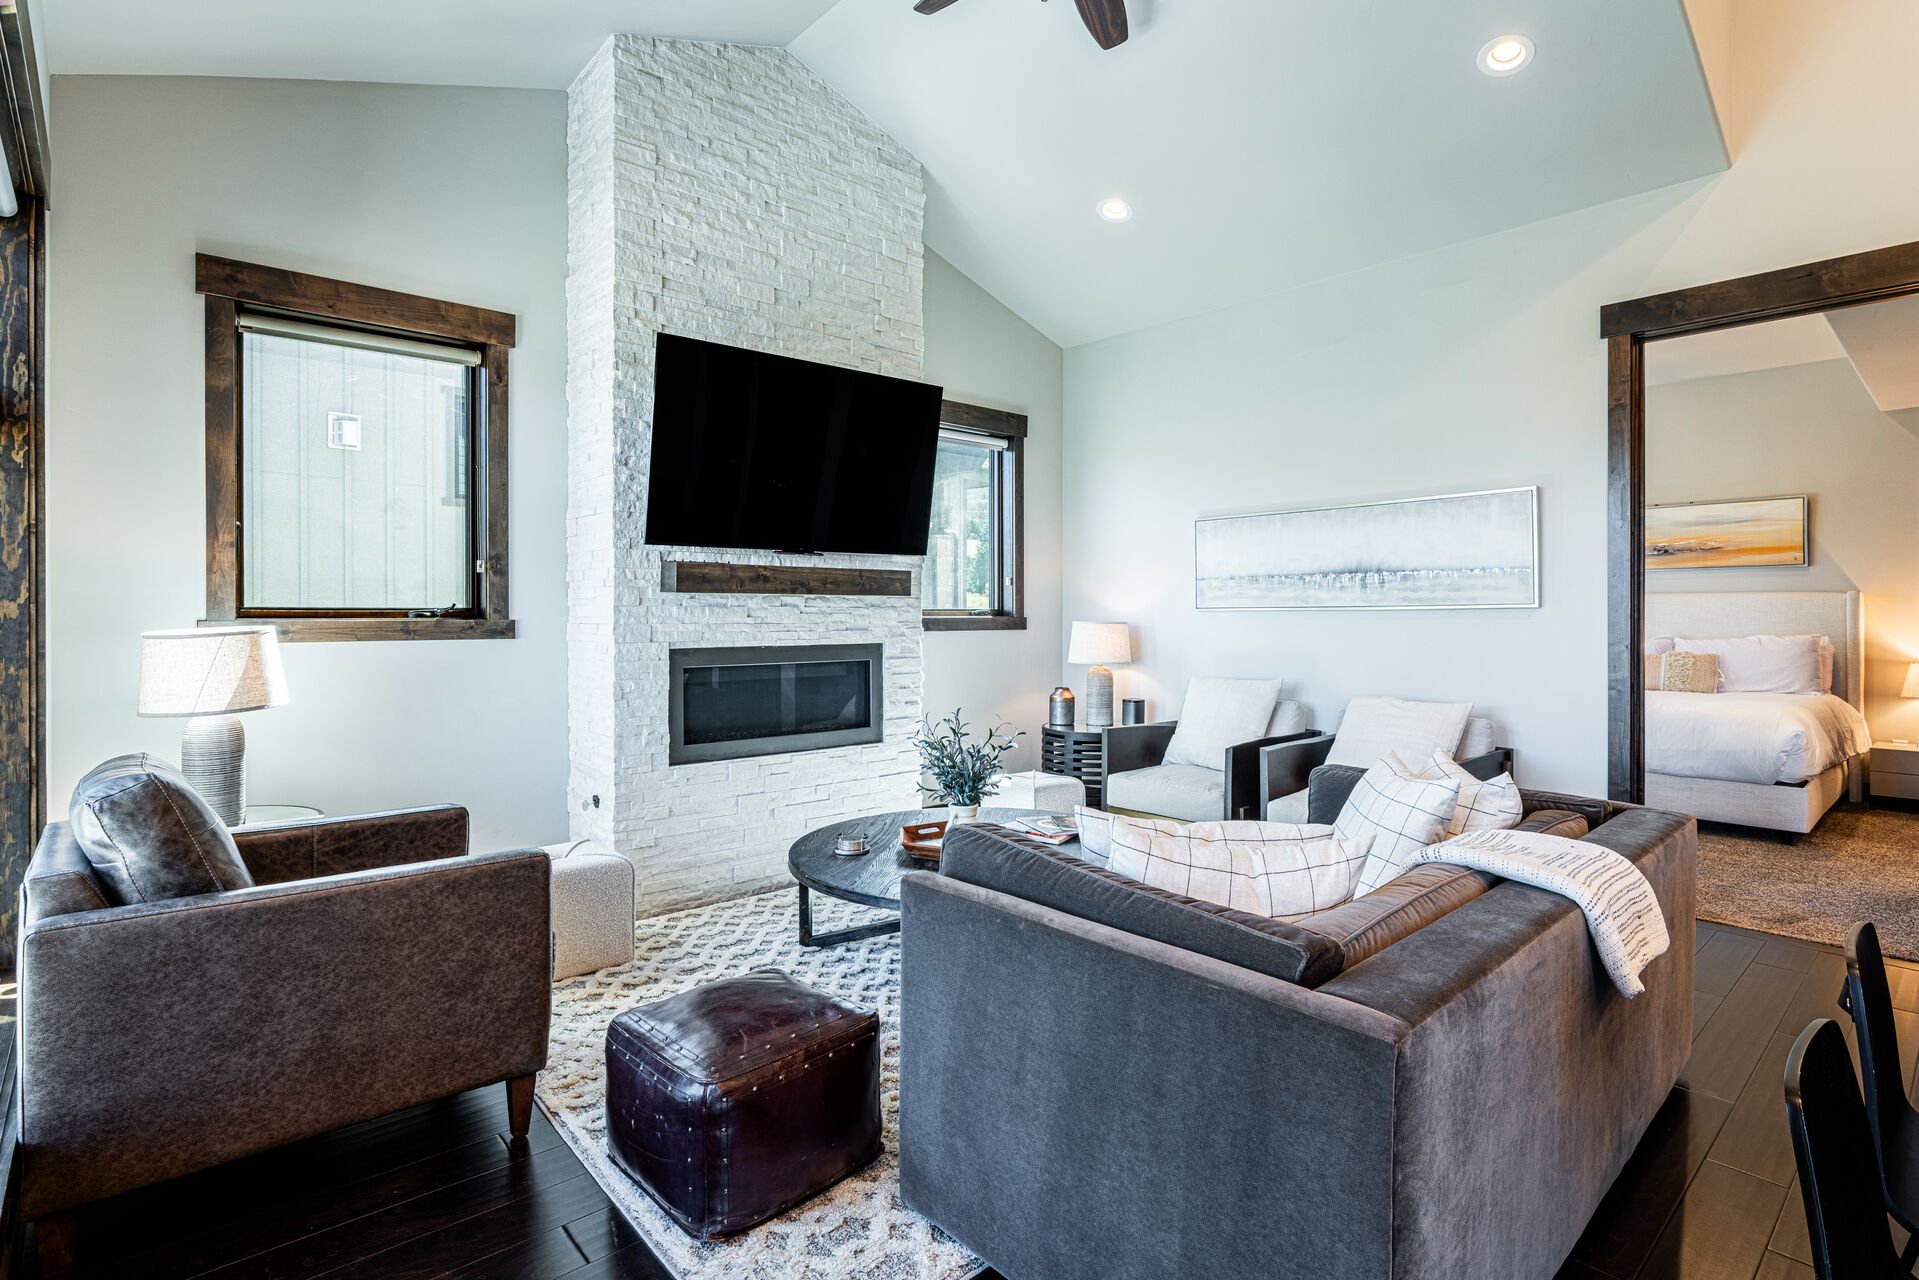 Comfortable furnishings with Smart TV, gas fireplace, and views